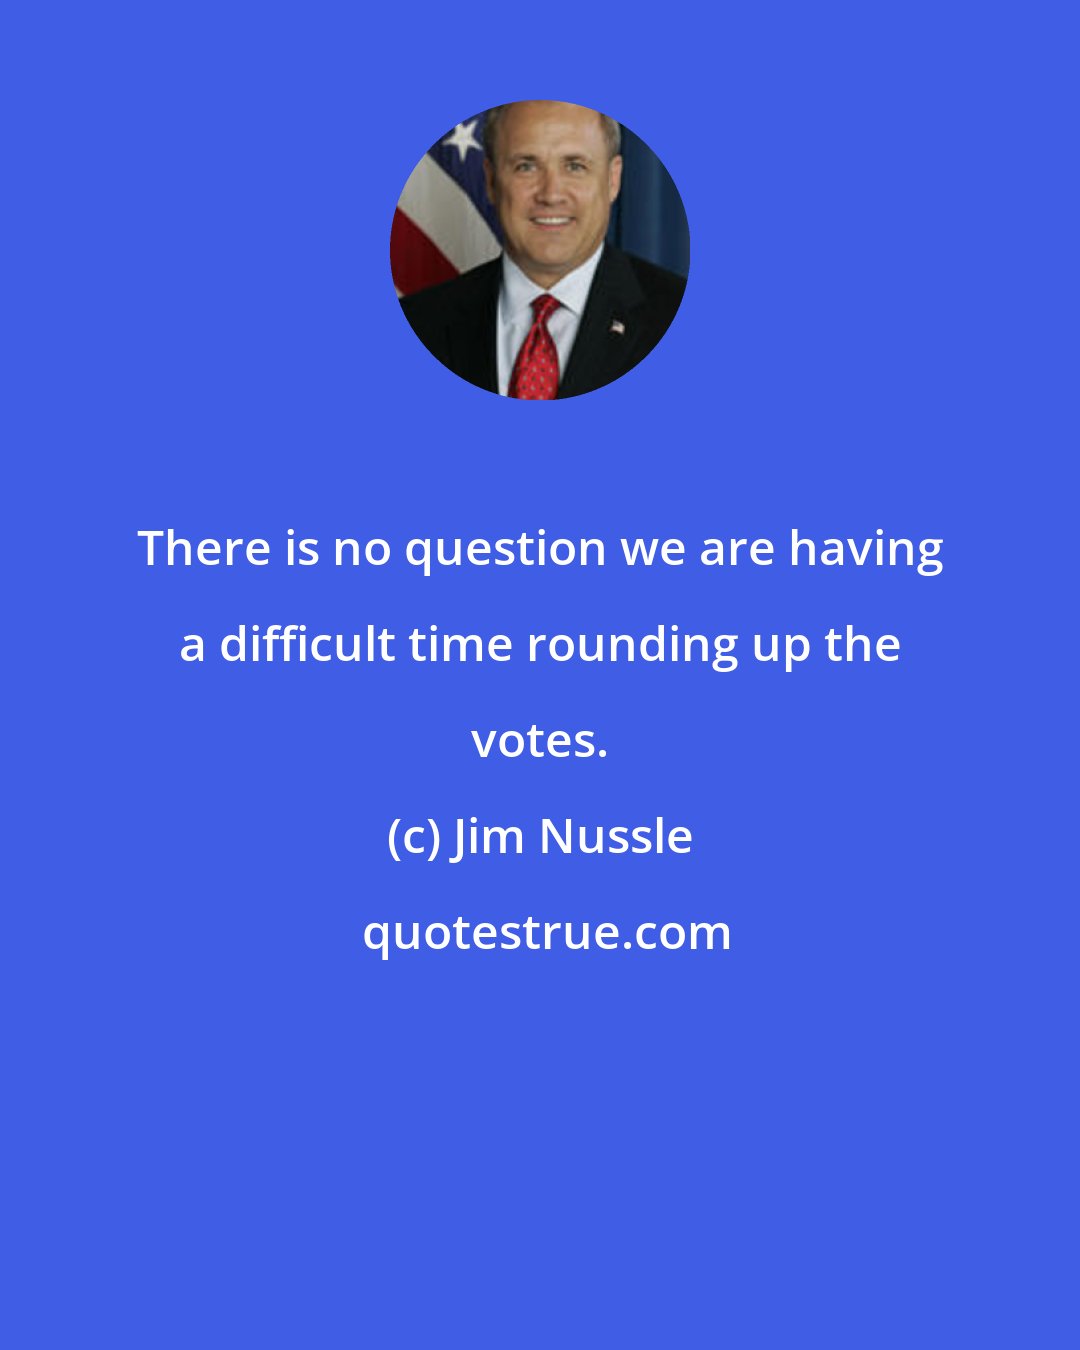 Jim Nussle: There is no question we are having a difficult time rounding up the votes.